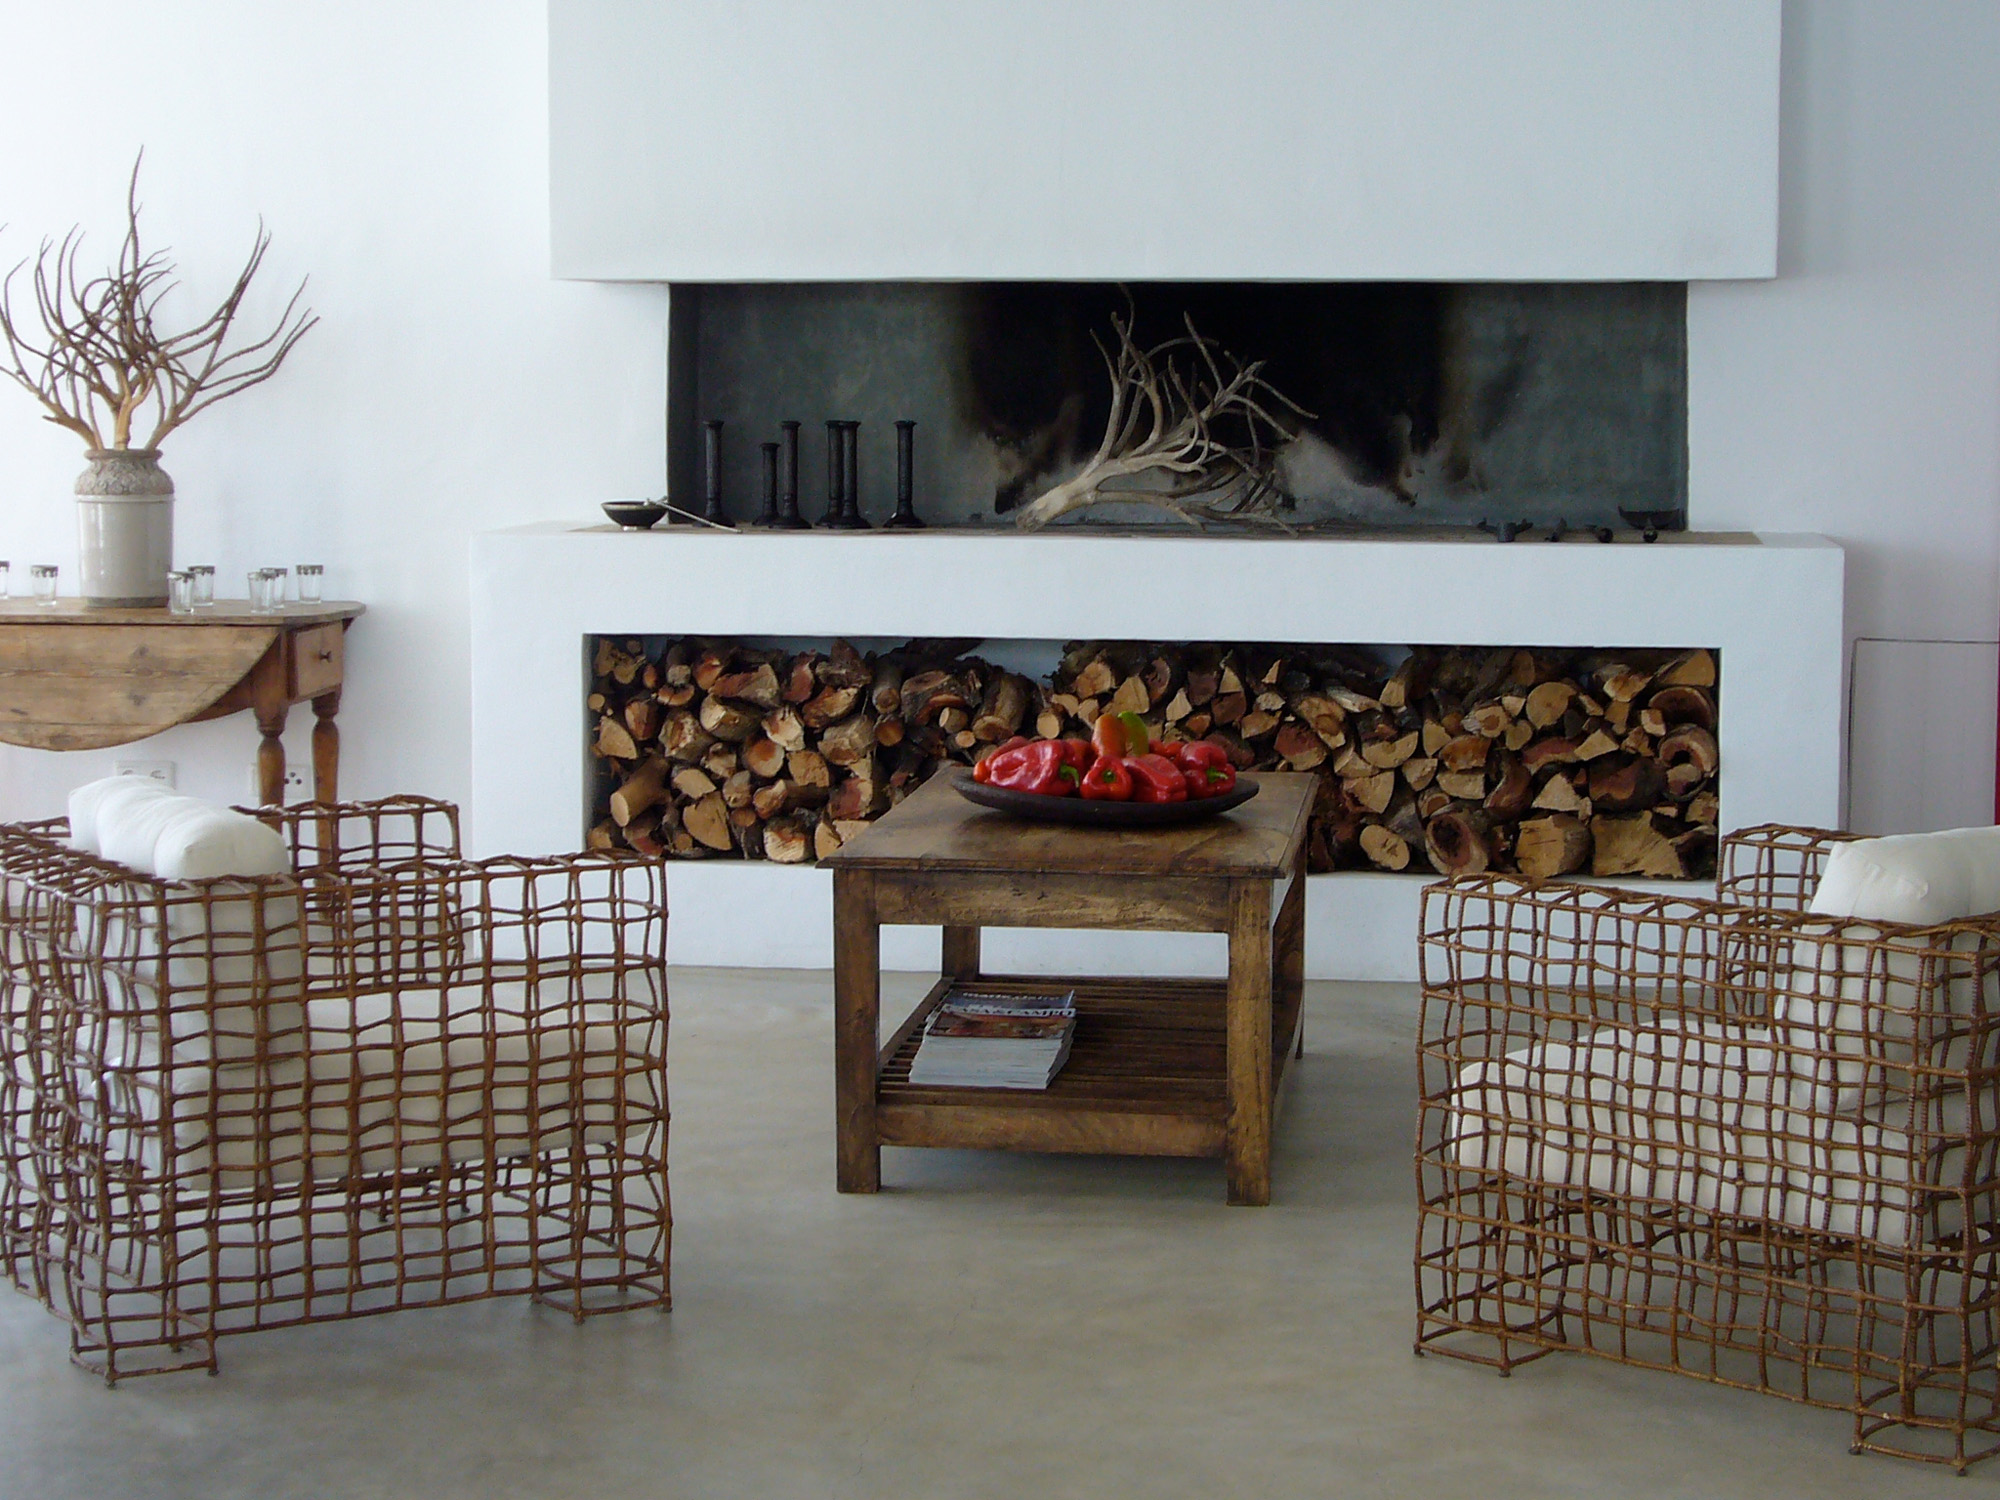 Fireplace by Clarisse Grumbach-Palme